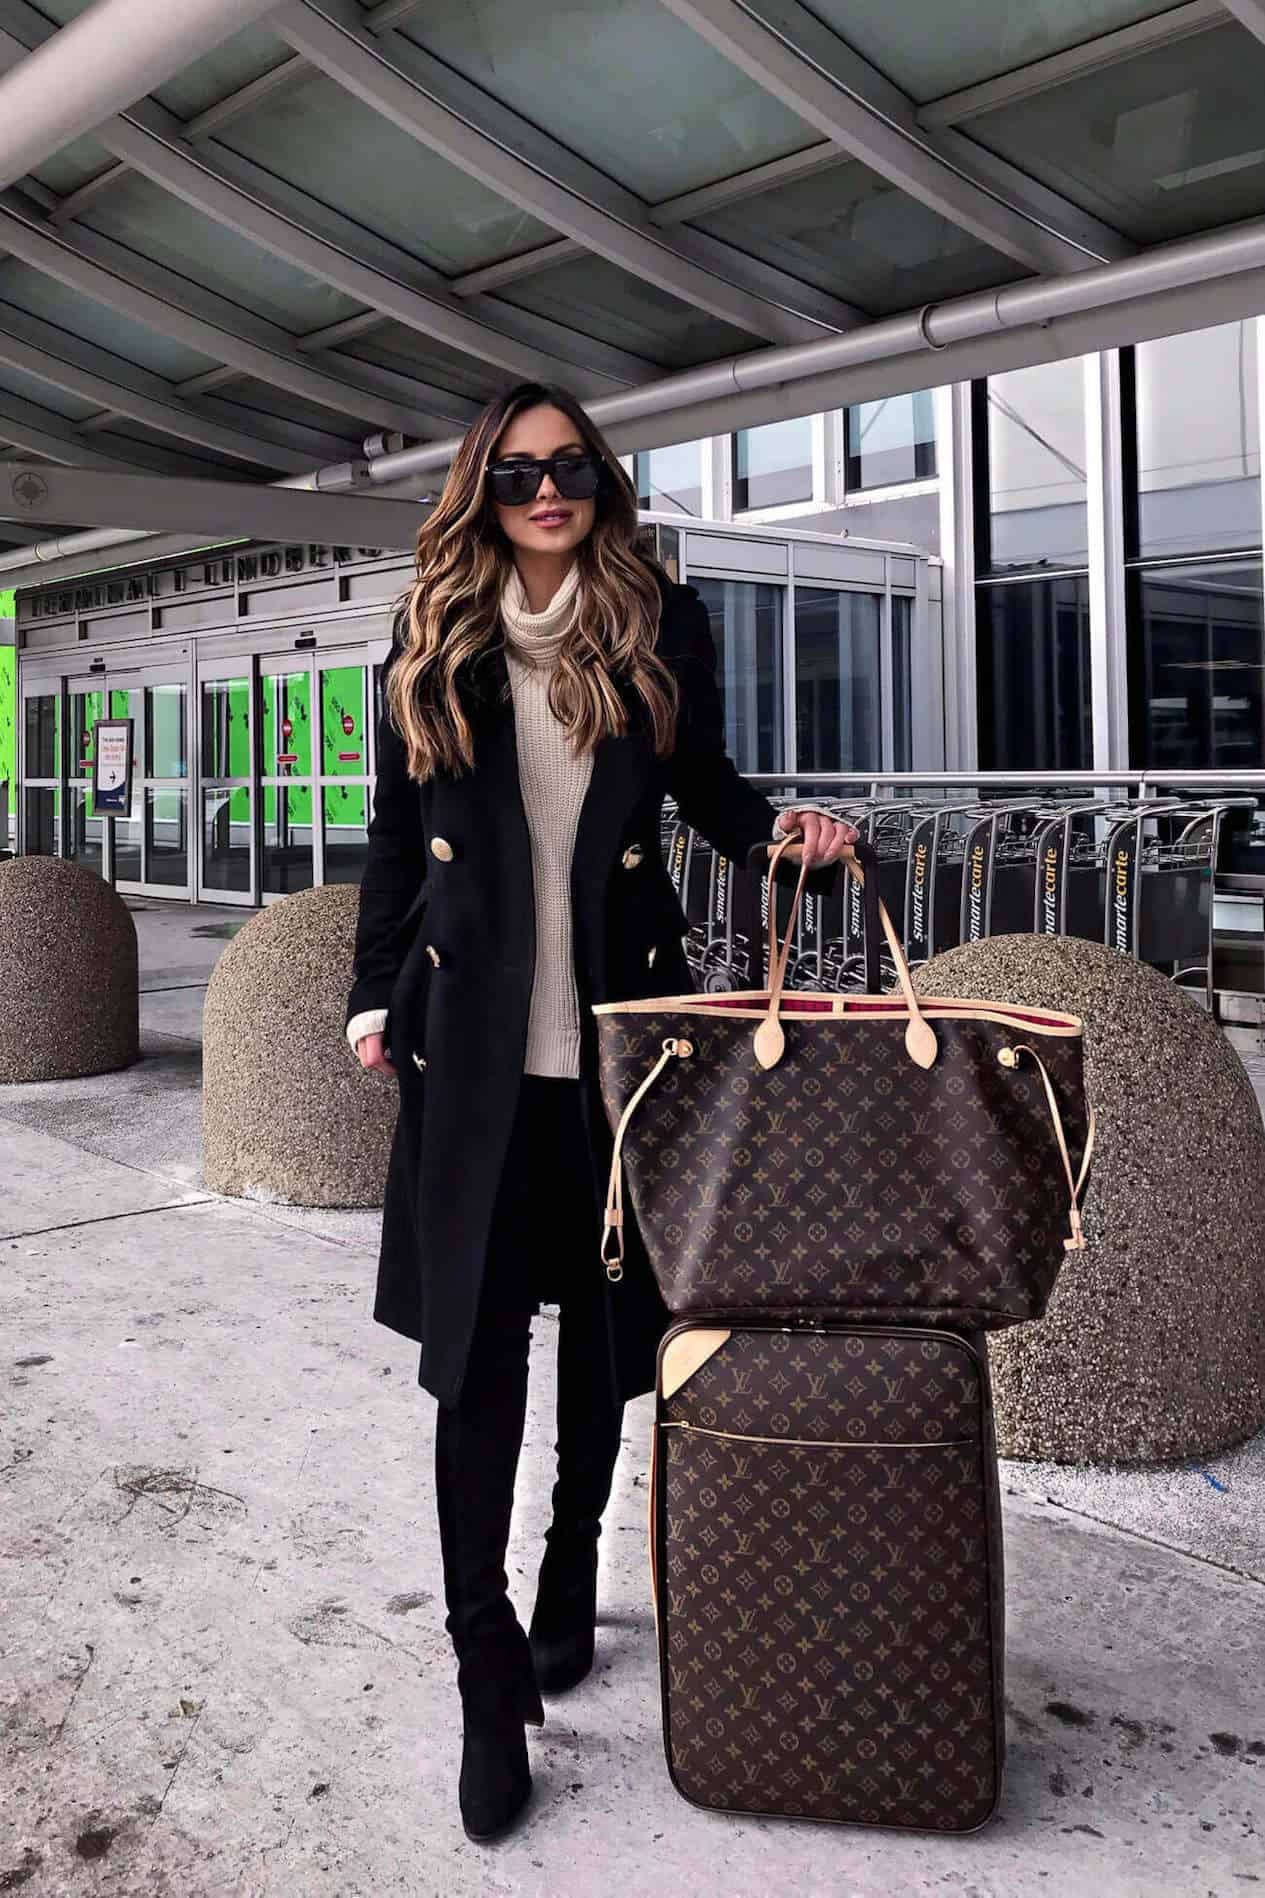 image of a woman with long brown hair standing outside an airport terminal with Louis Vuitton luggage